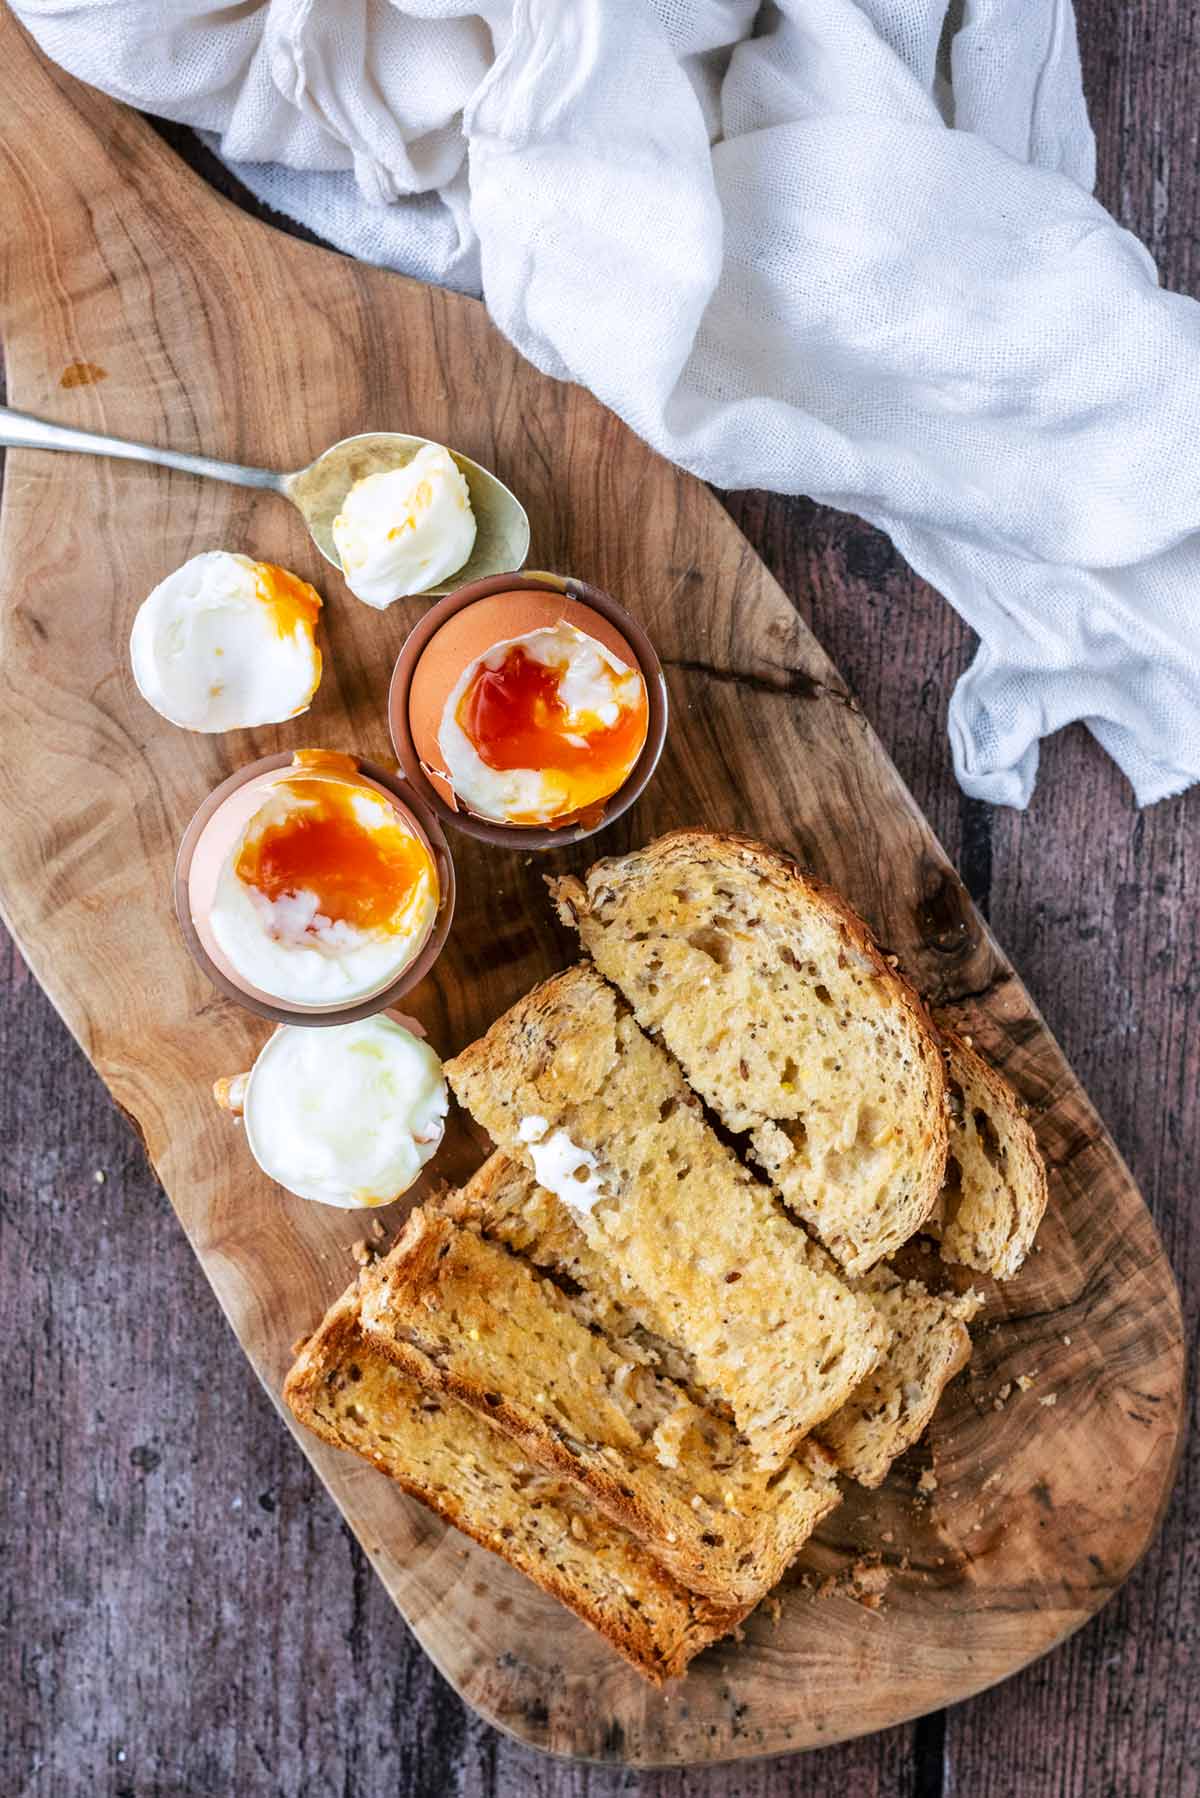 Two soft boiled eggs and toast soldiers on a wooden serving board.